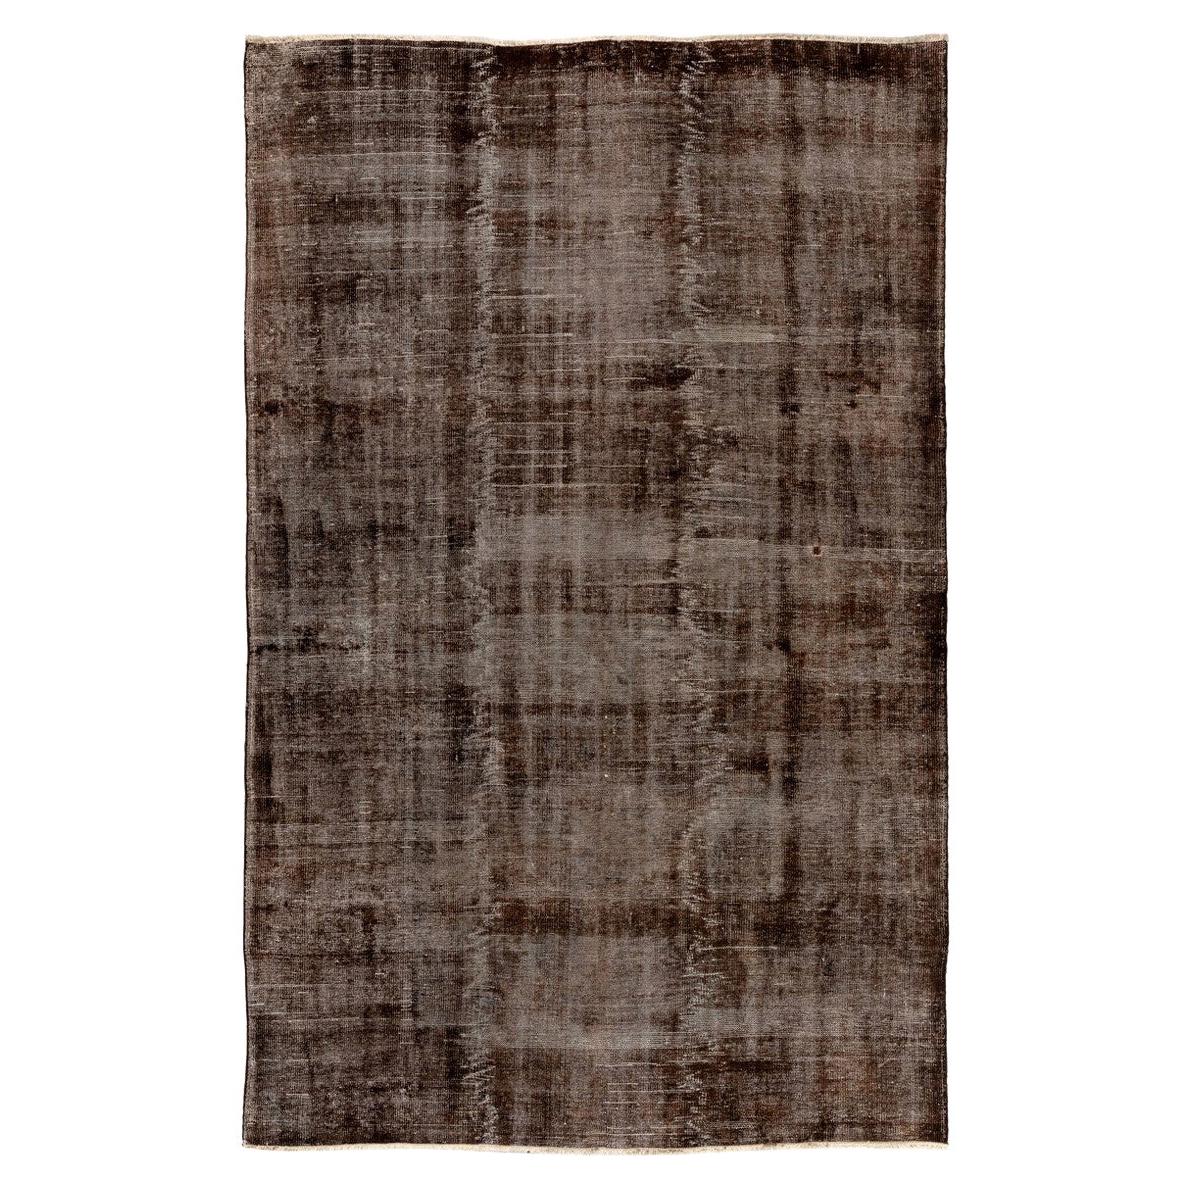 6.8x10.2 Ft Distressed Mid-20th Century Handmade Anatolian Rug Re-Dyed in Brown